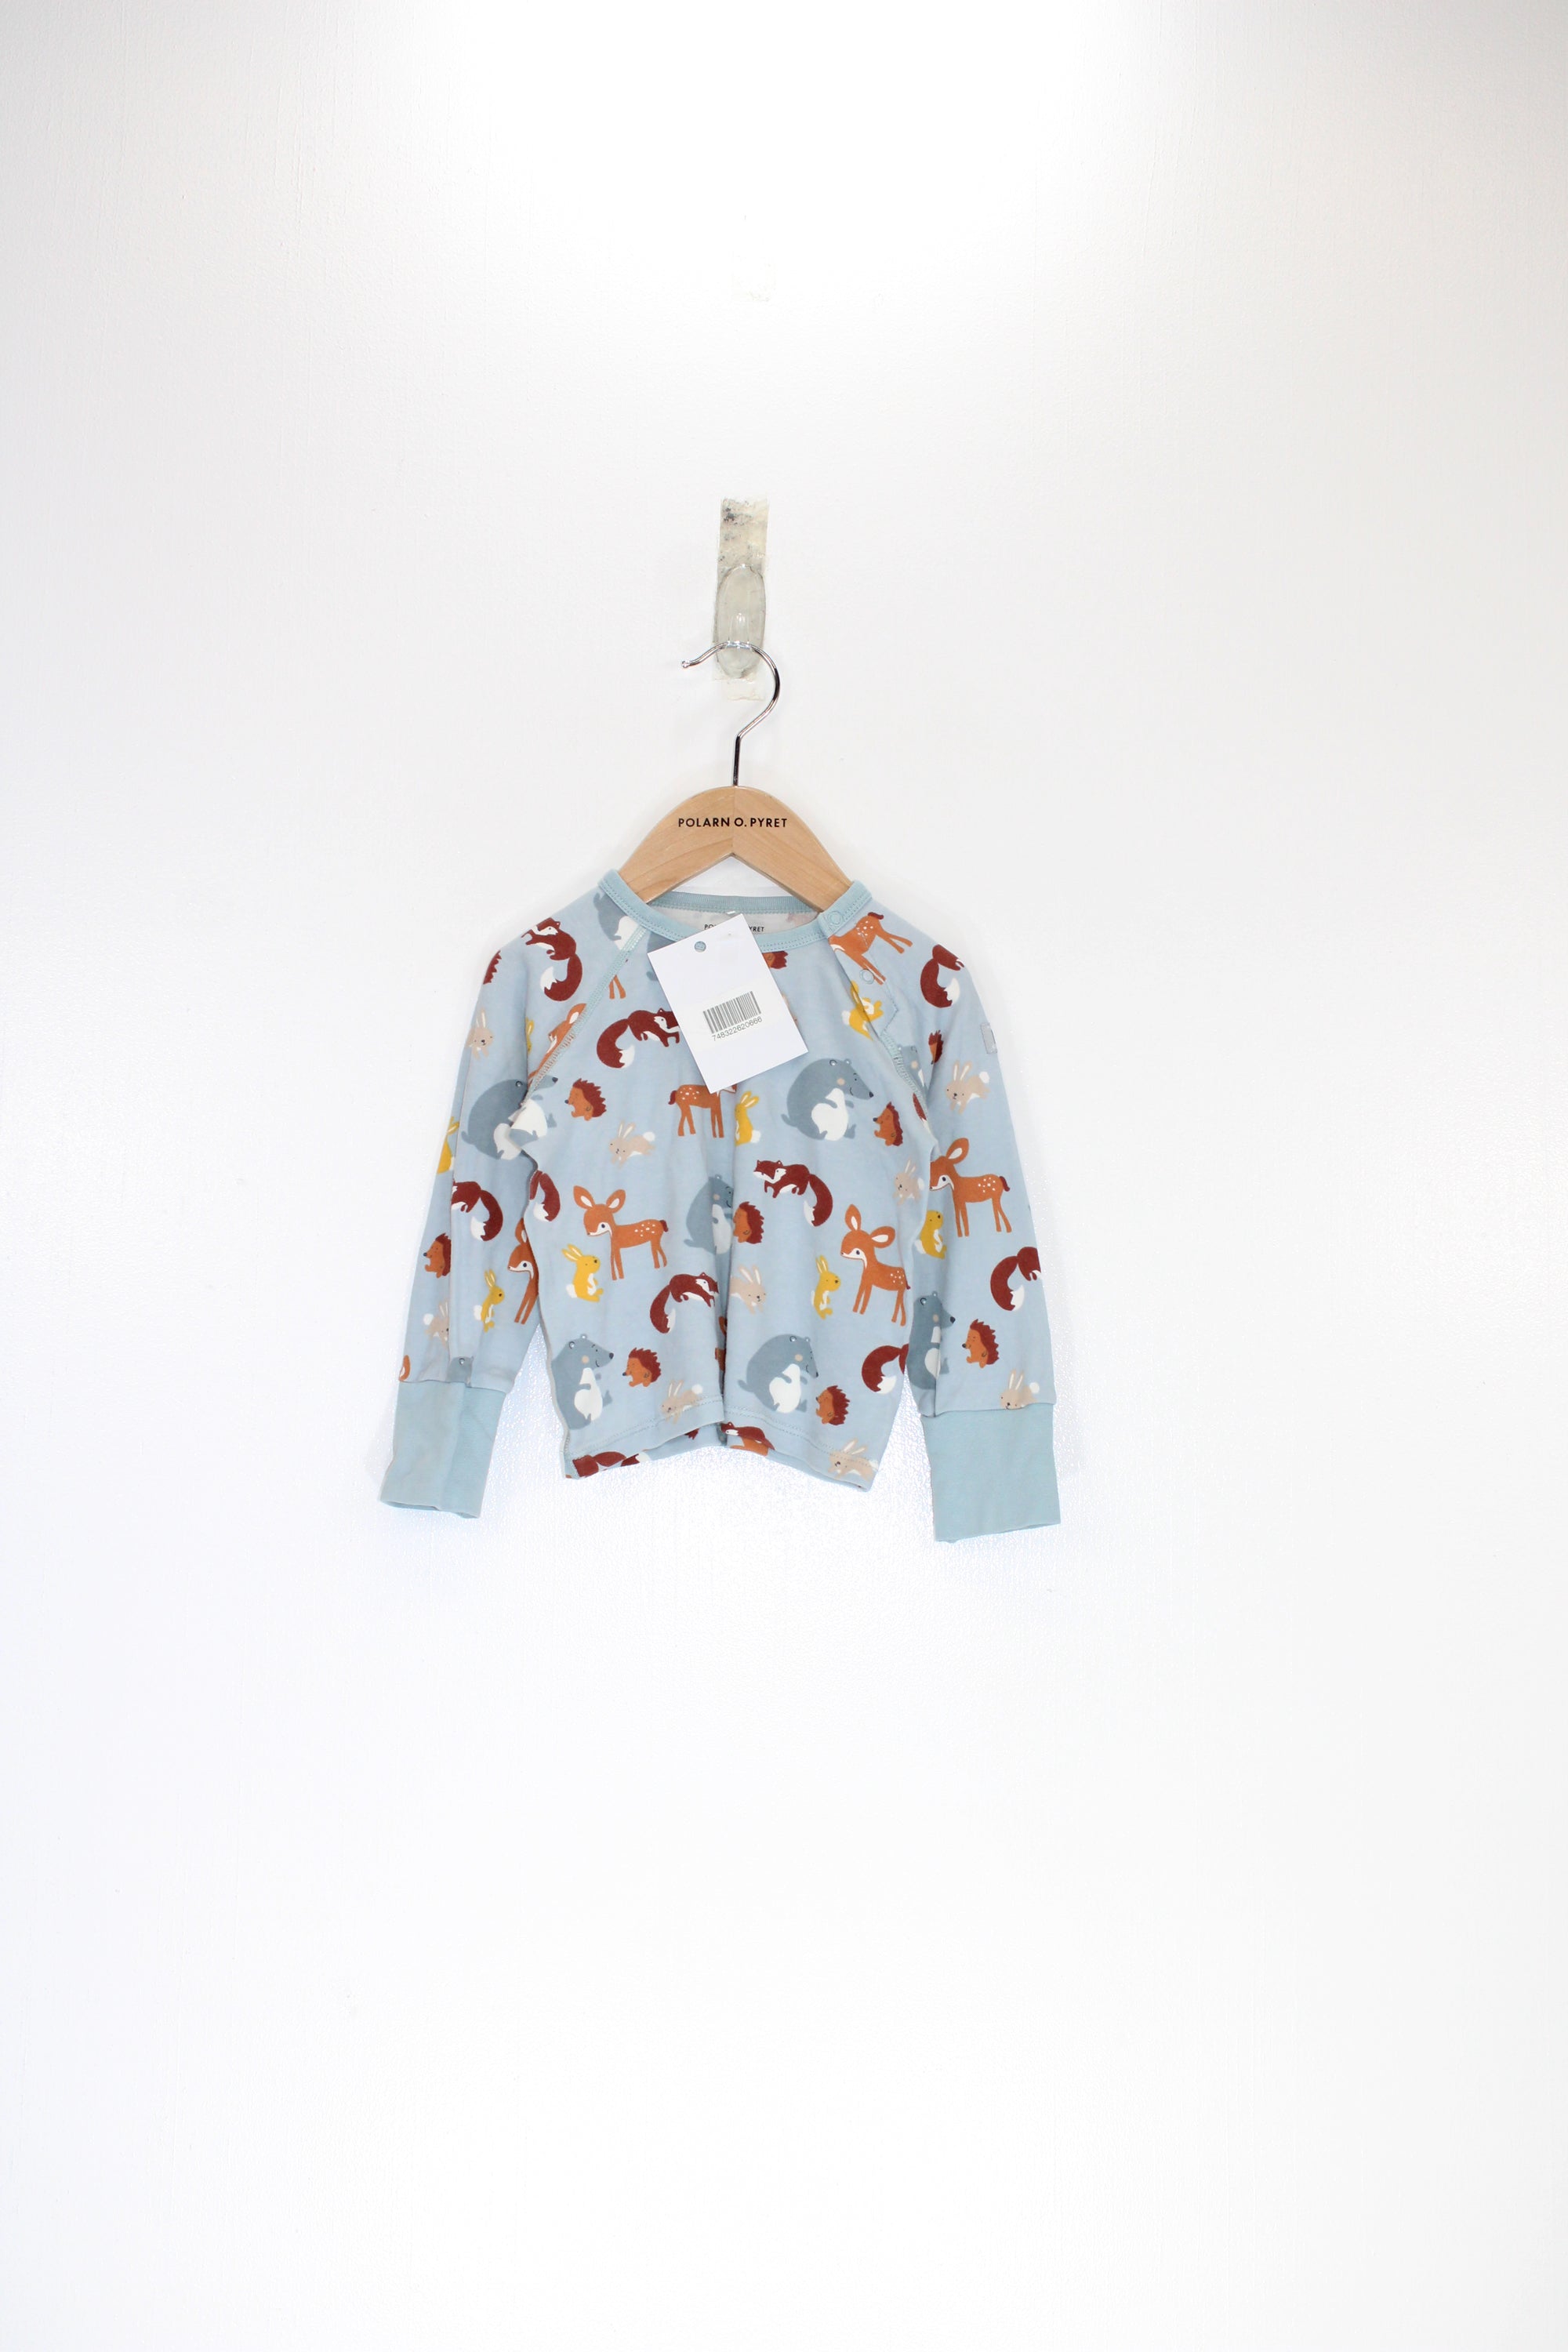 Woodland Friends Baby Top